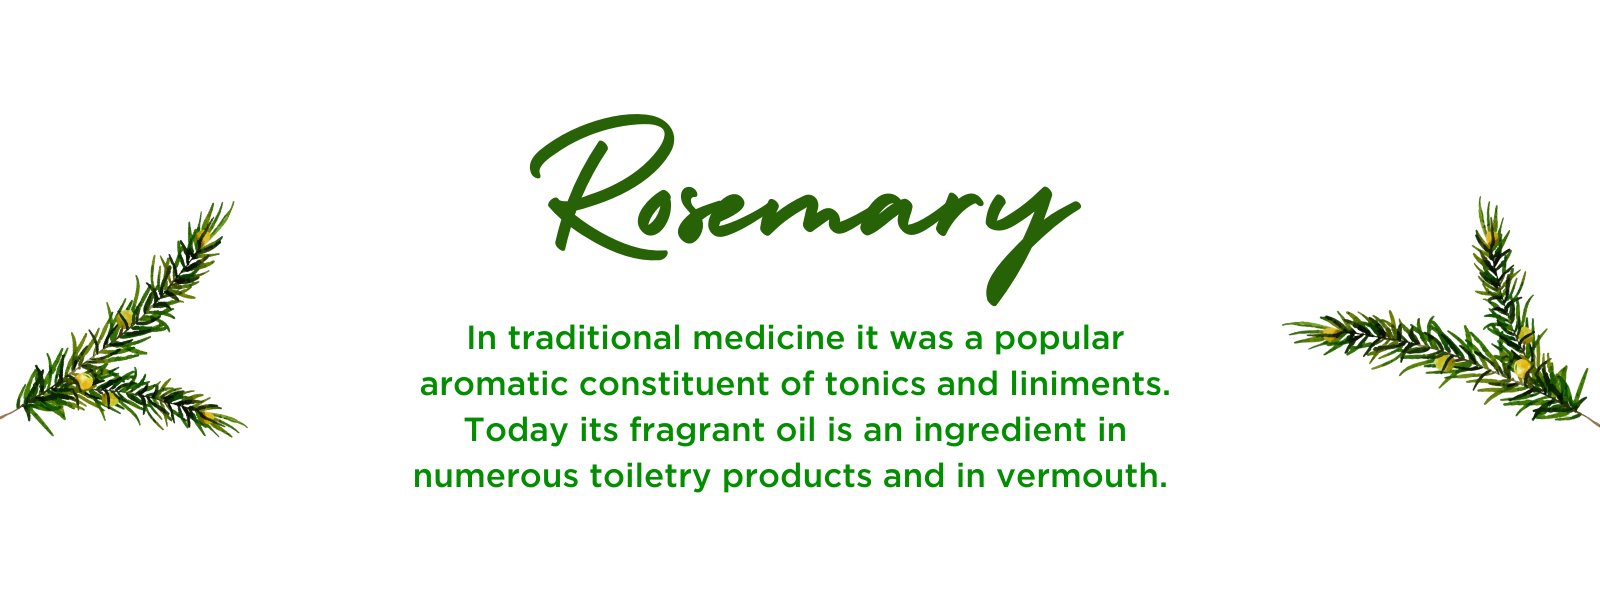 Rosemary - Health Benefits, Uses and Important Facts